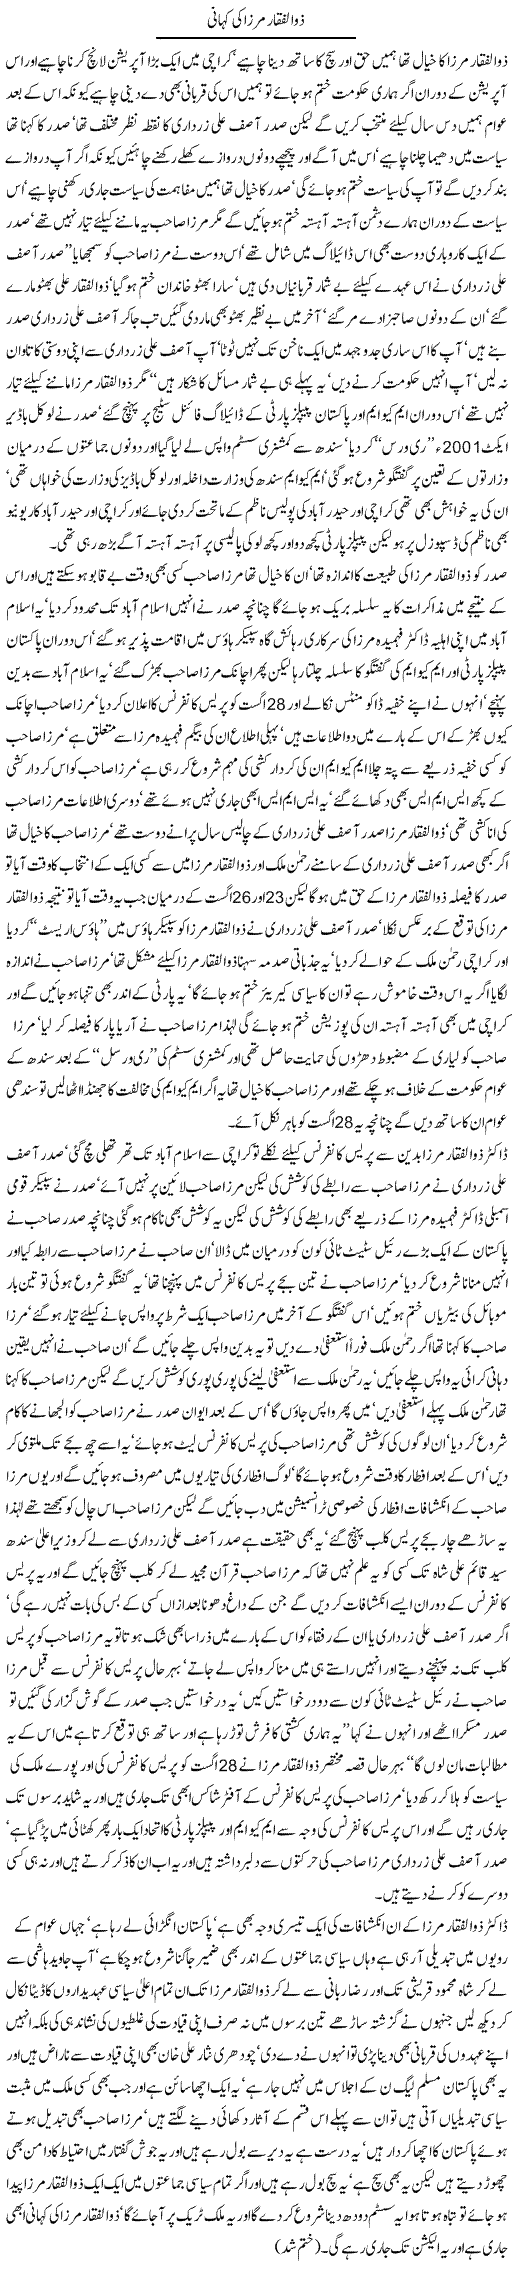 Allegations of Zulfiqar Mirza - Urdu Column By Javed Chaudhry